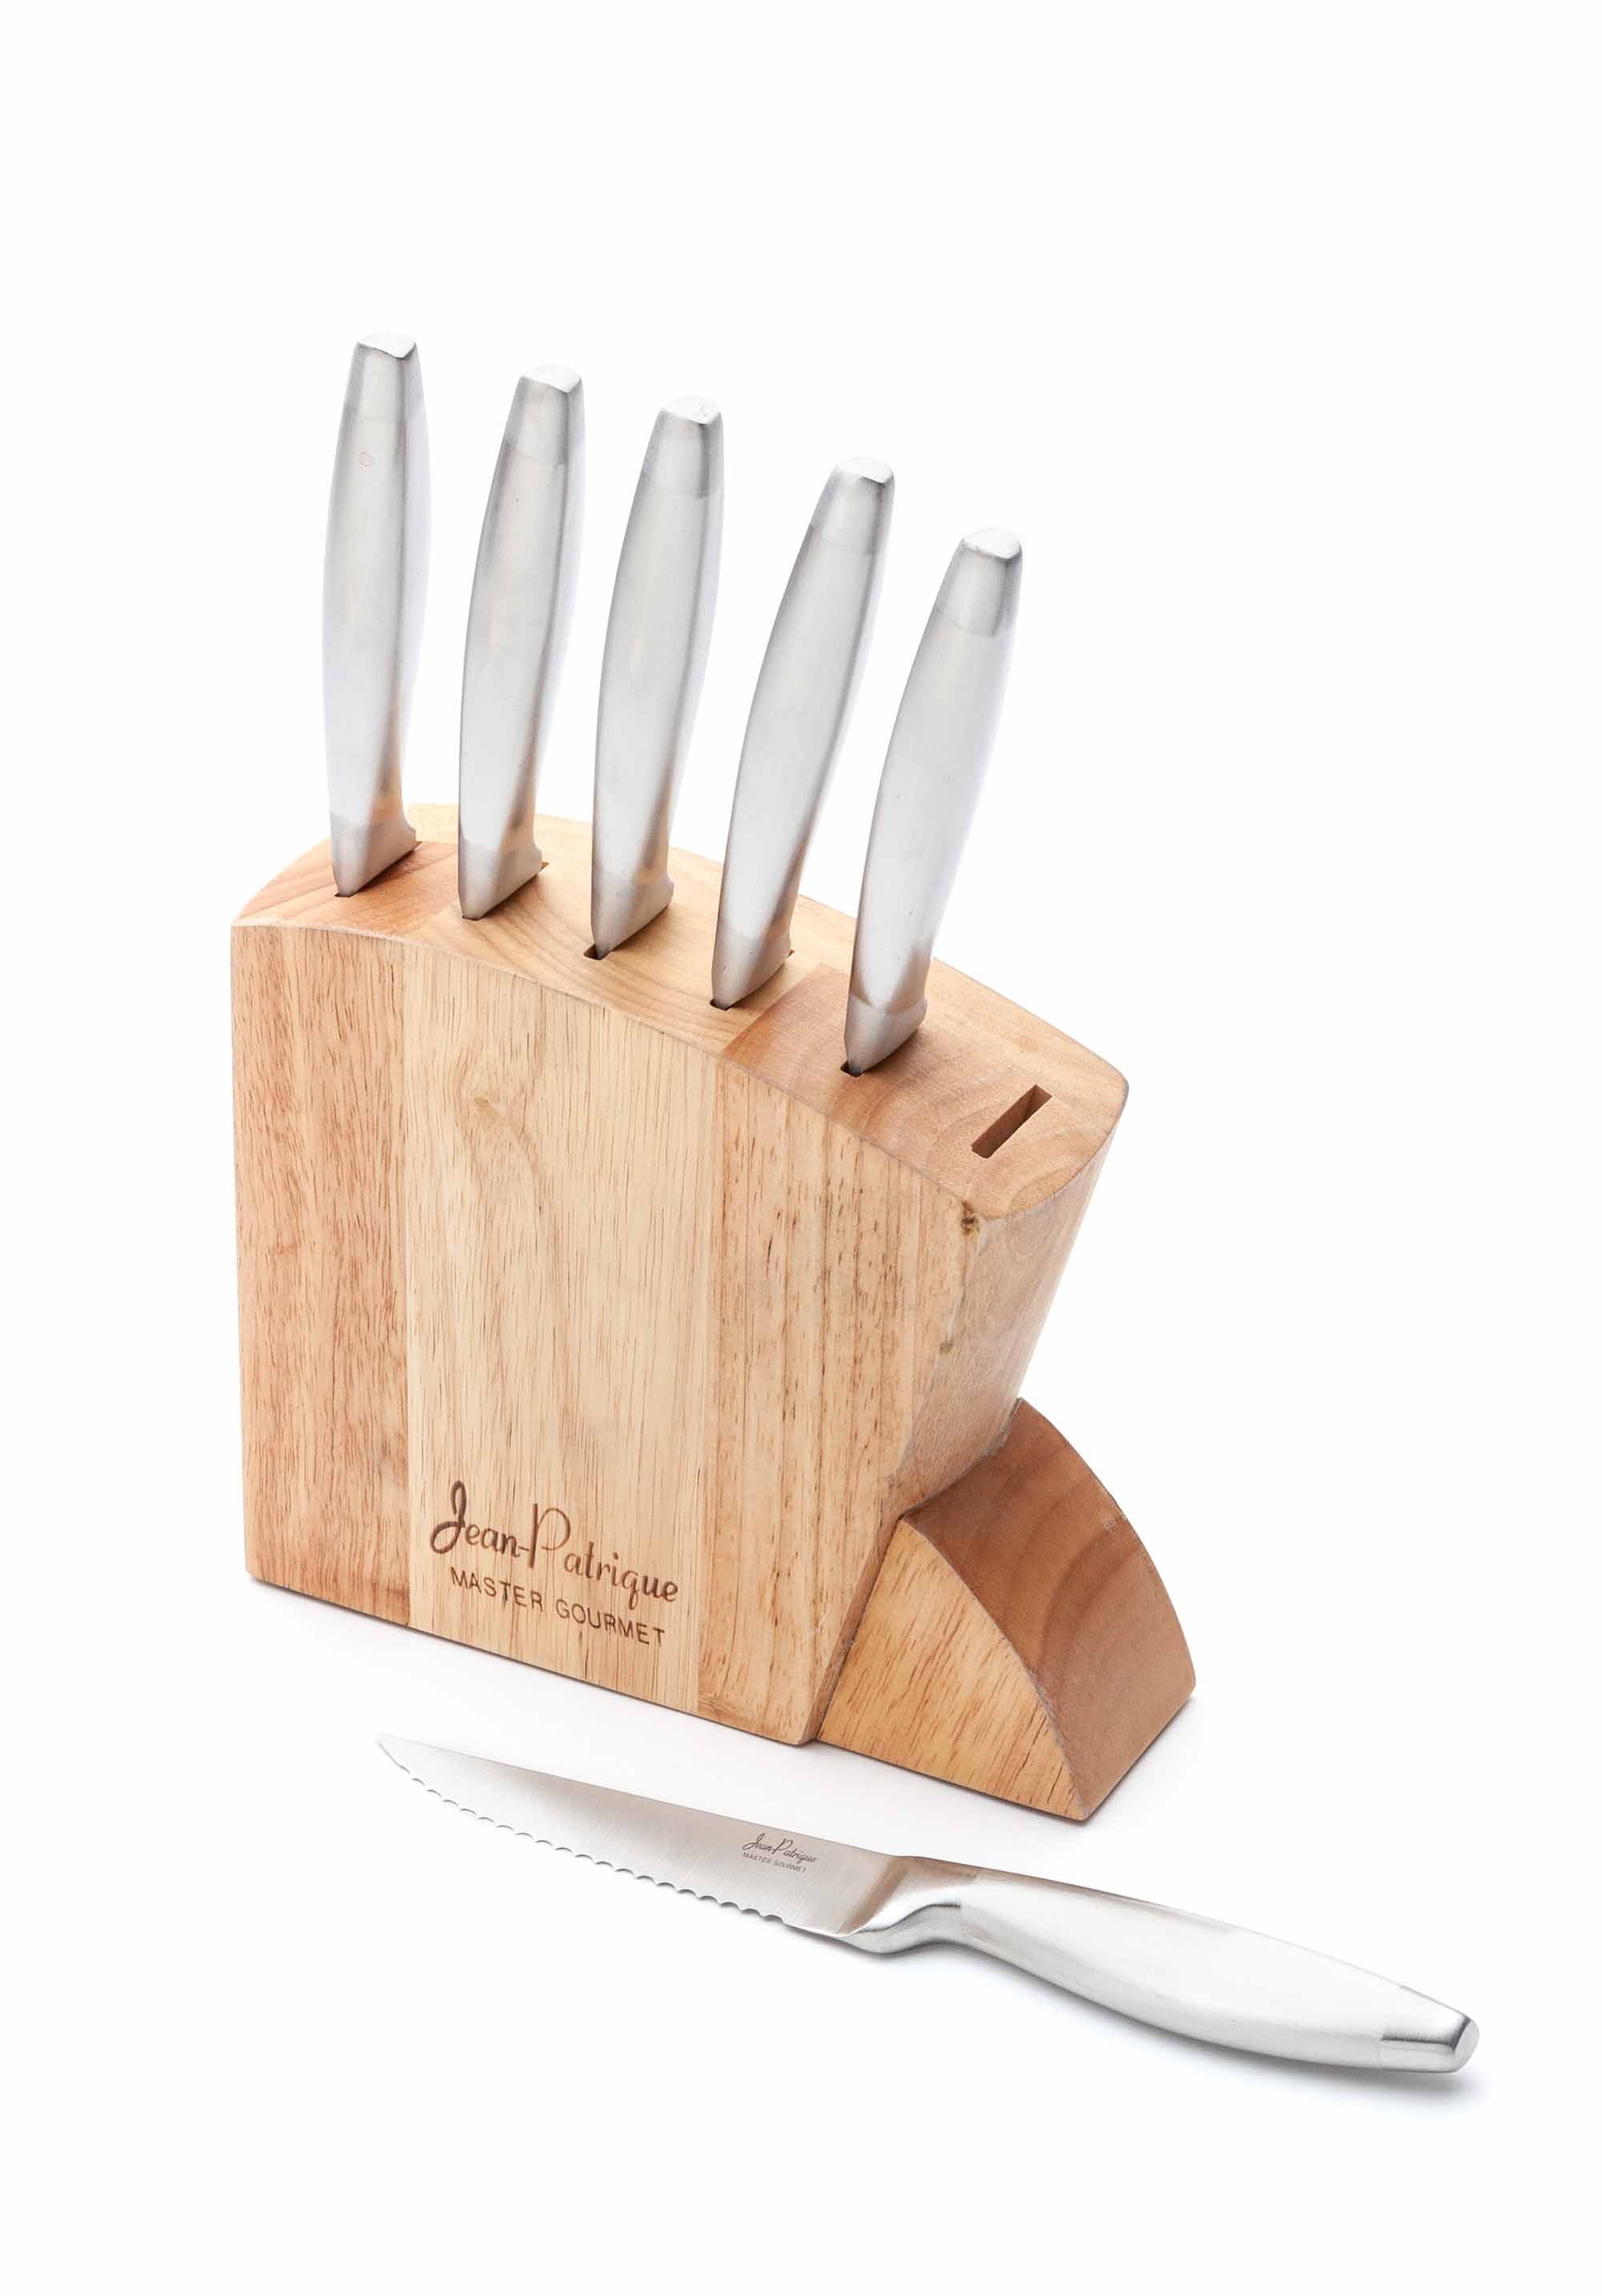 Gourmet Traditions Commercial Series 6 Piece Knife Set